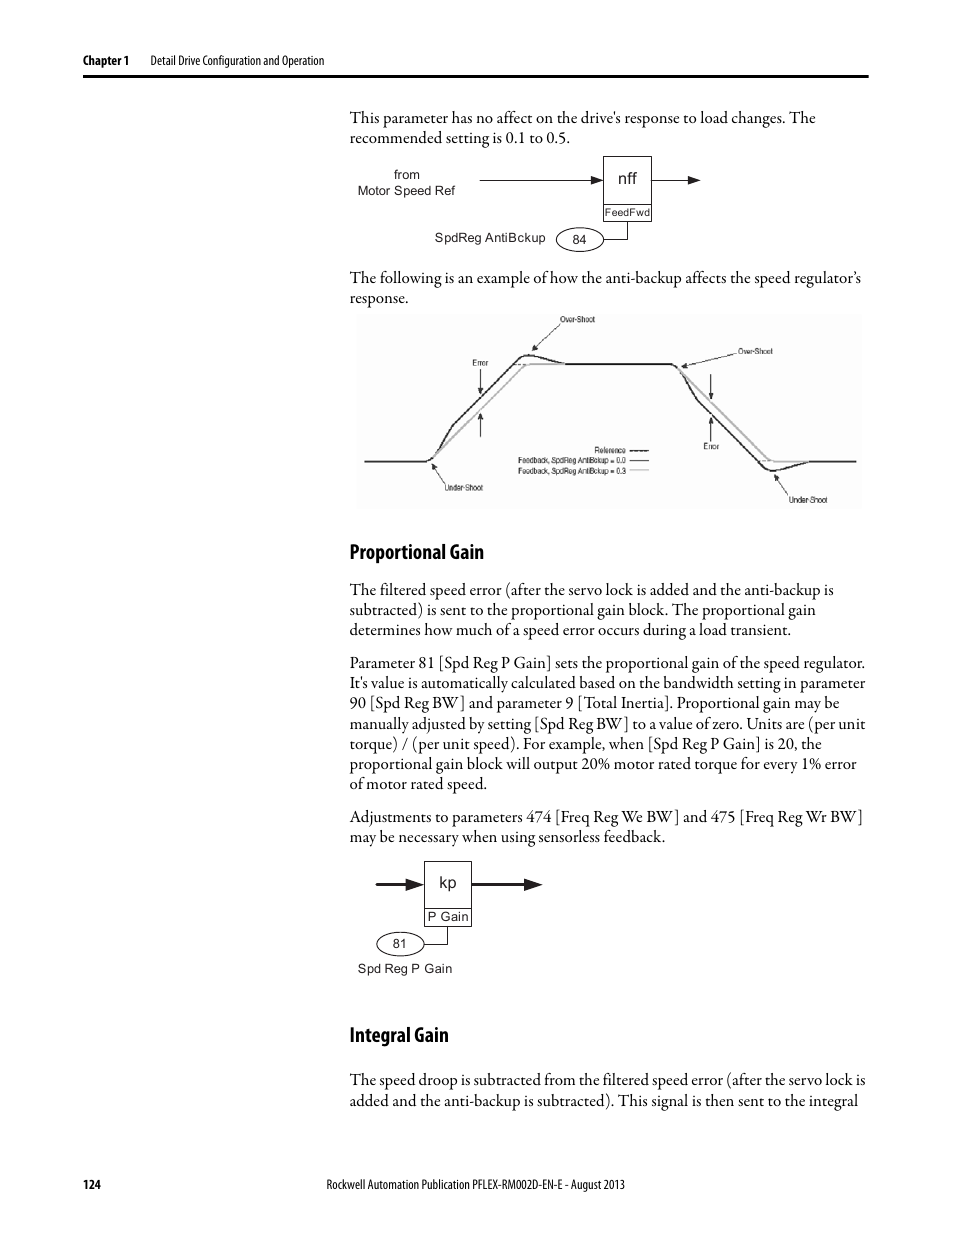 Proportional gain, Integral gain, Proportional gain integral gain | Rockwell Automation 20D PowerFlex 700S with Phase I Control Reference Manual User Manual | Page 124 / 190